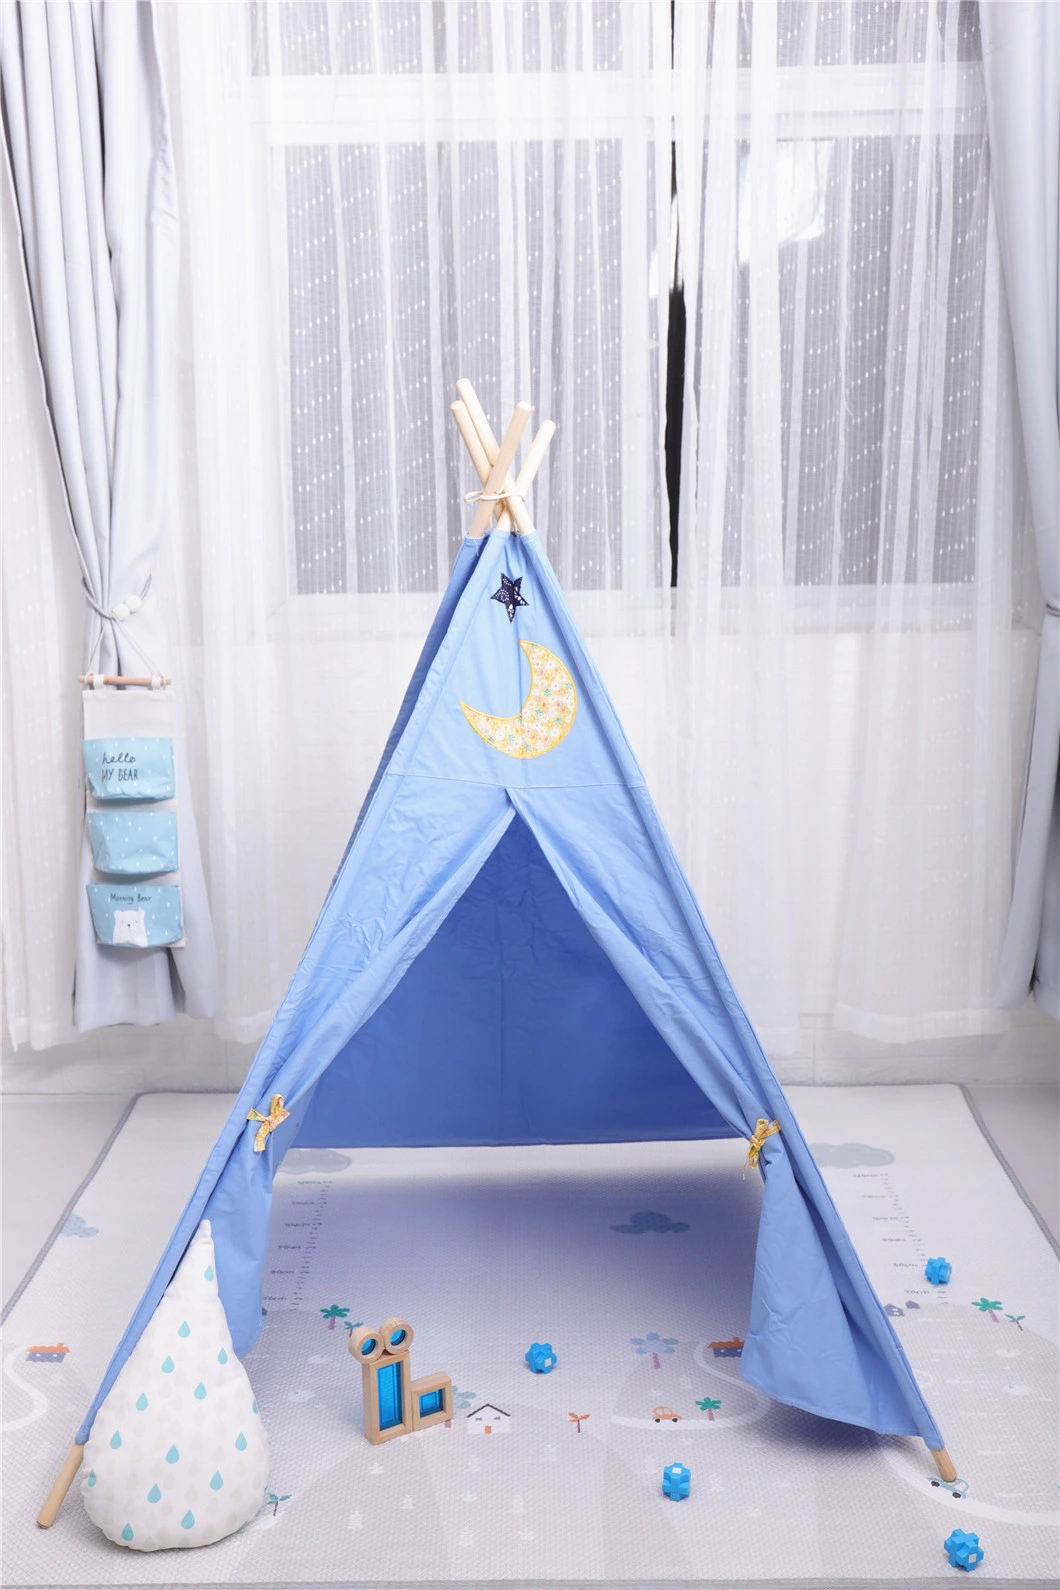 Wholesale Cotton Canvas Kids Teepee Tent Indoor Kids Play Tipi Tents Unique Children Teepee Tent